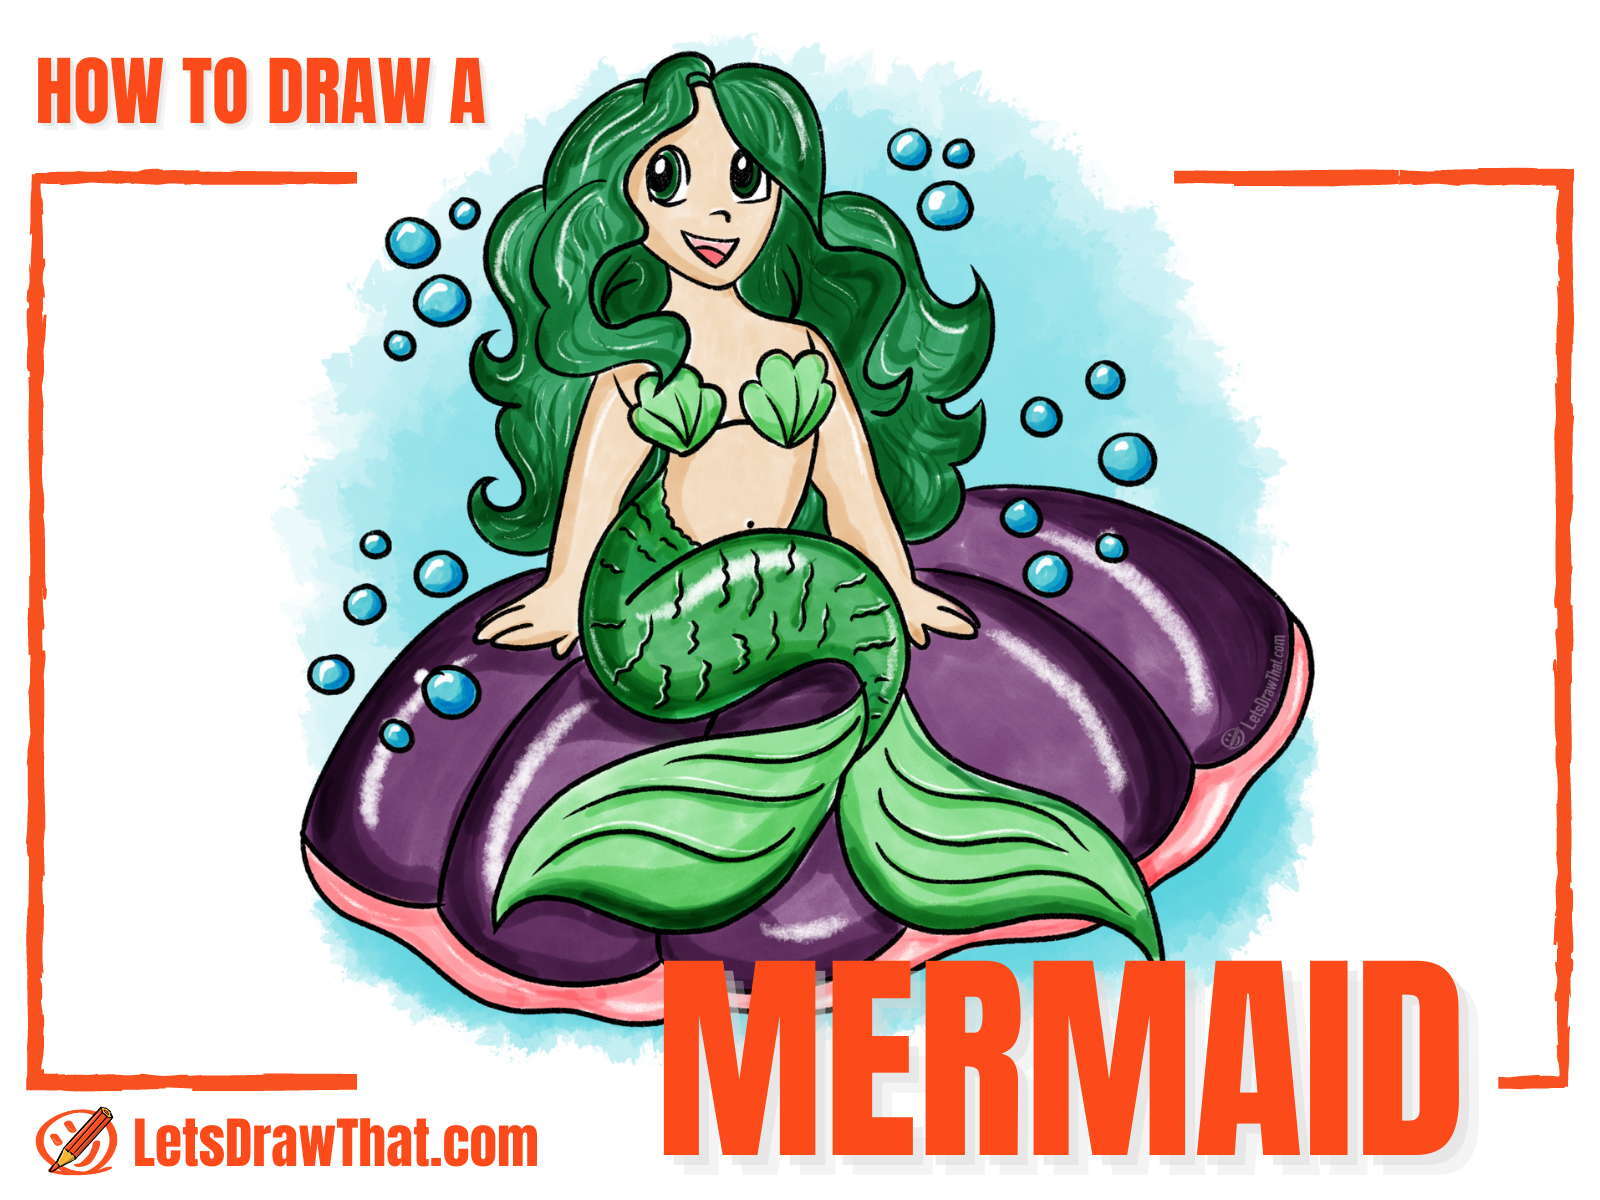 How to Draw a Mermaid: Step by Step